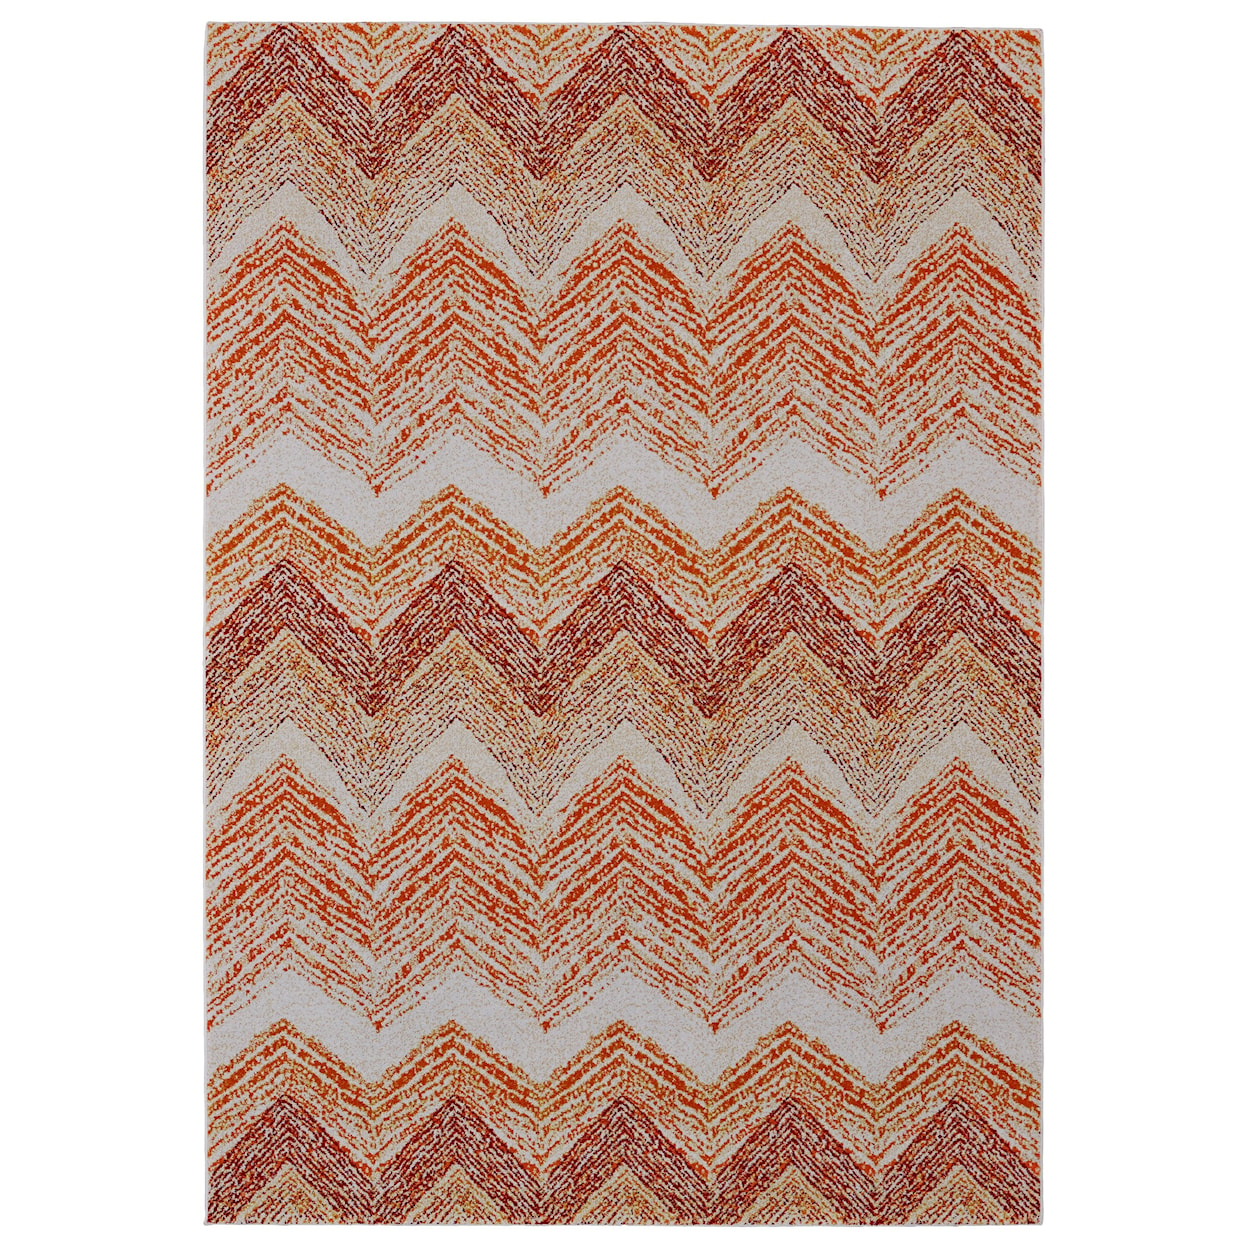 Feizy Rugs Cambrian Sunset 5' x 8' Area Rug